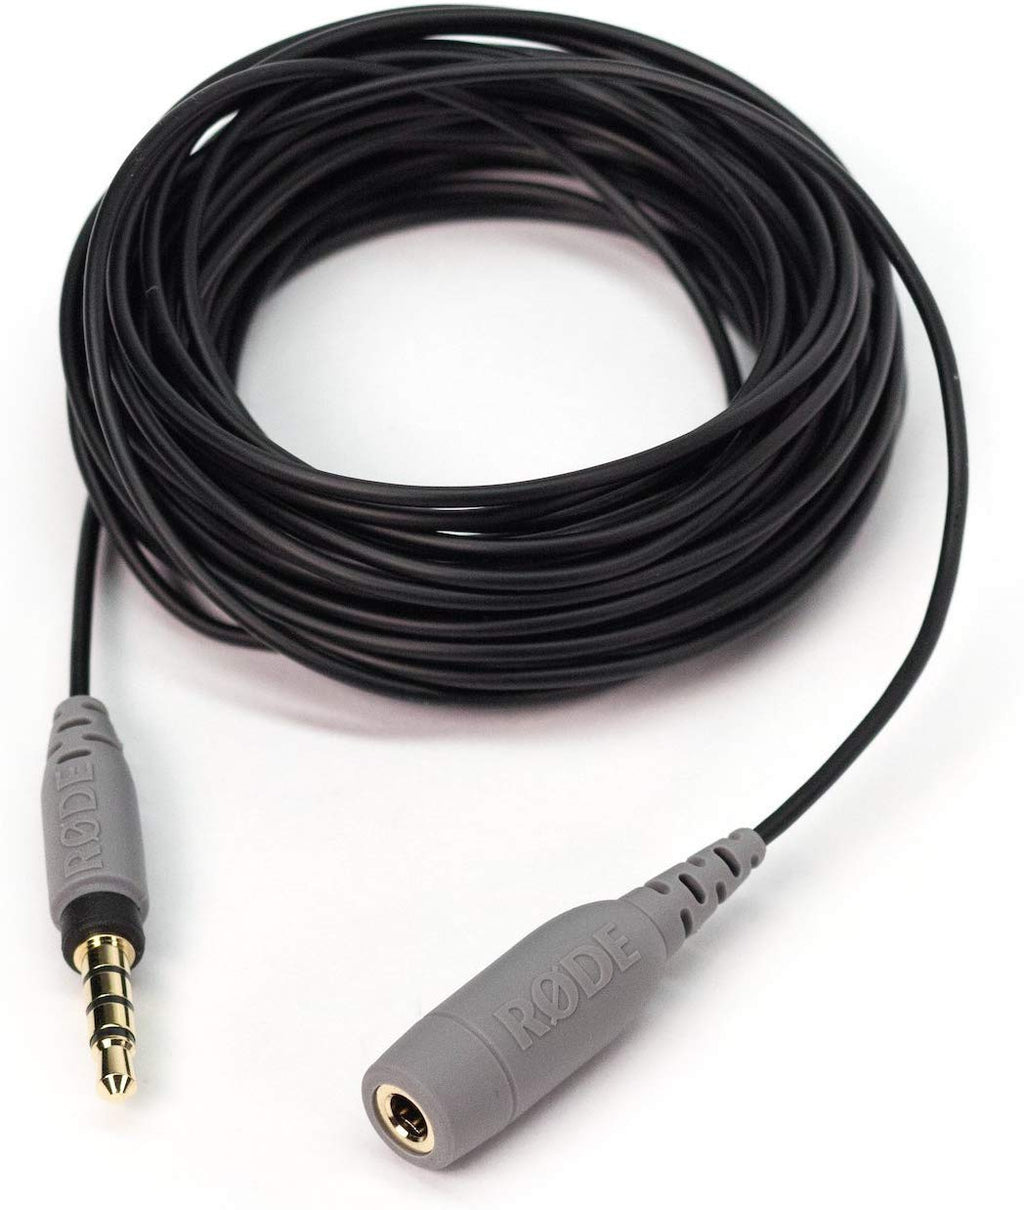 Rode SC1 TRRS Extension Cable For SmartLav+ Microphone, 20 Feet